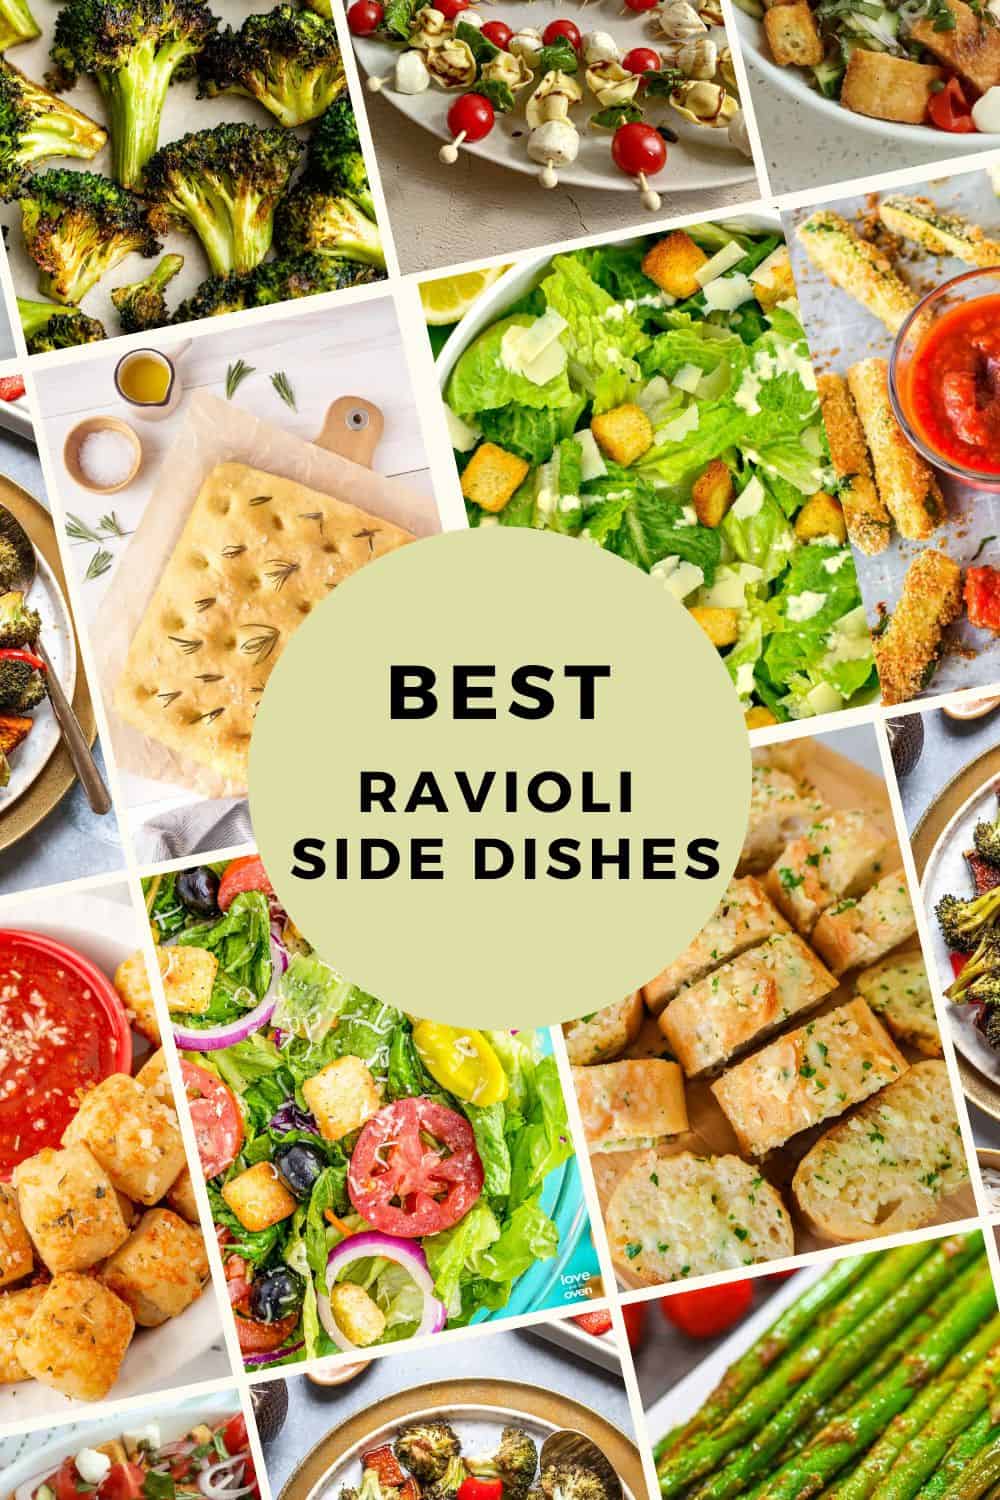 Images of various ravioli side dishes in a collage of the best ravioli sides.